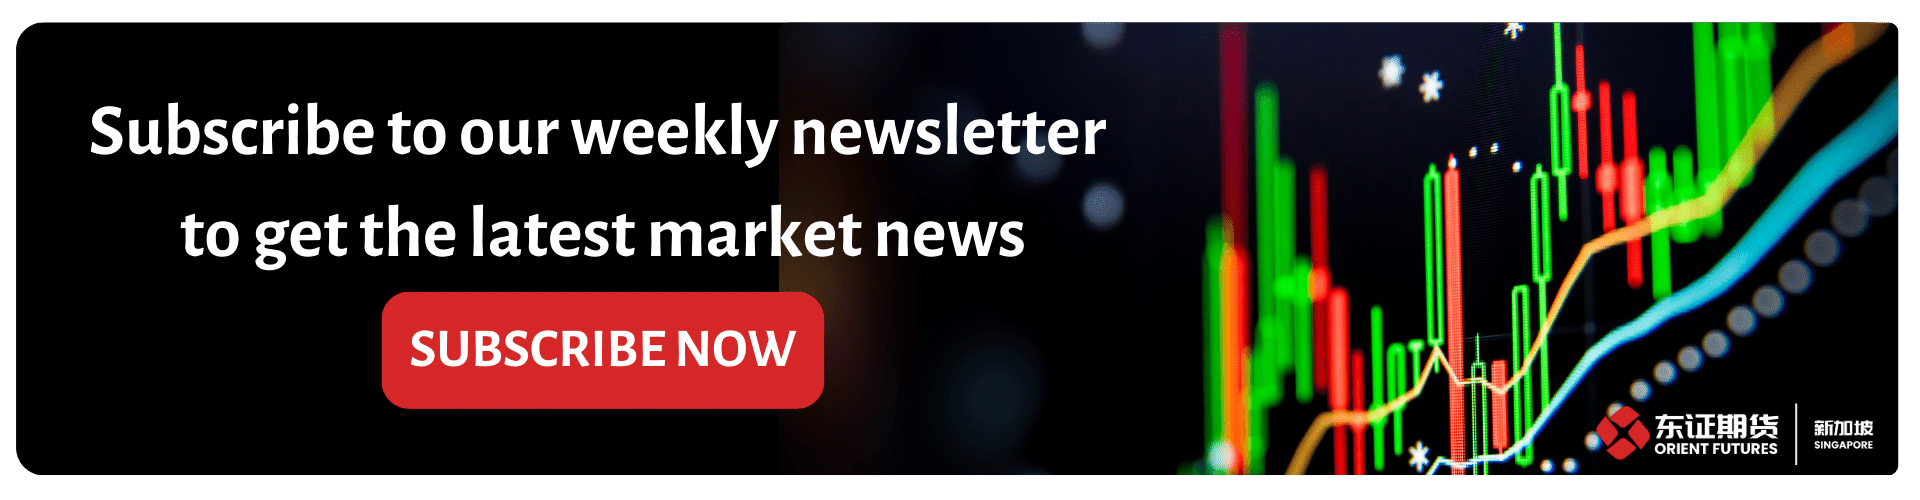 Subscribe to Orient Futures Singapore Weekly Newsletter